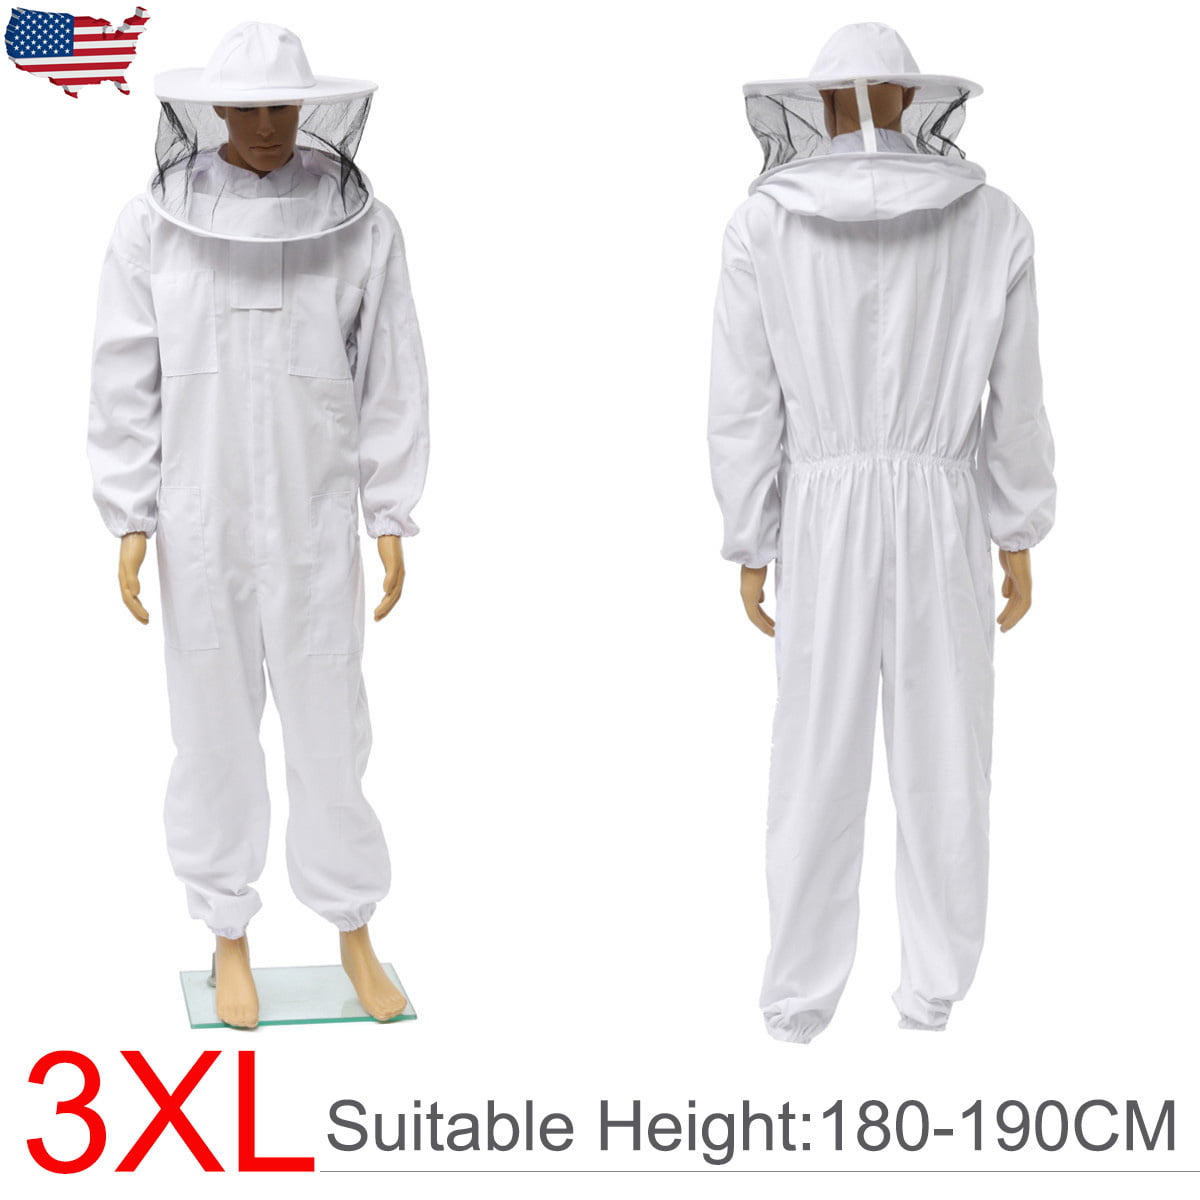 L-Full Body Beekeeping Suits Thicken Cotton Professional Siamese Bee Keep Suits 